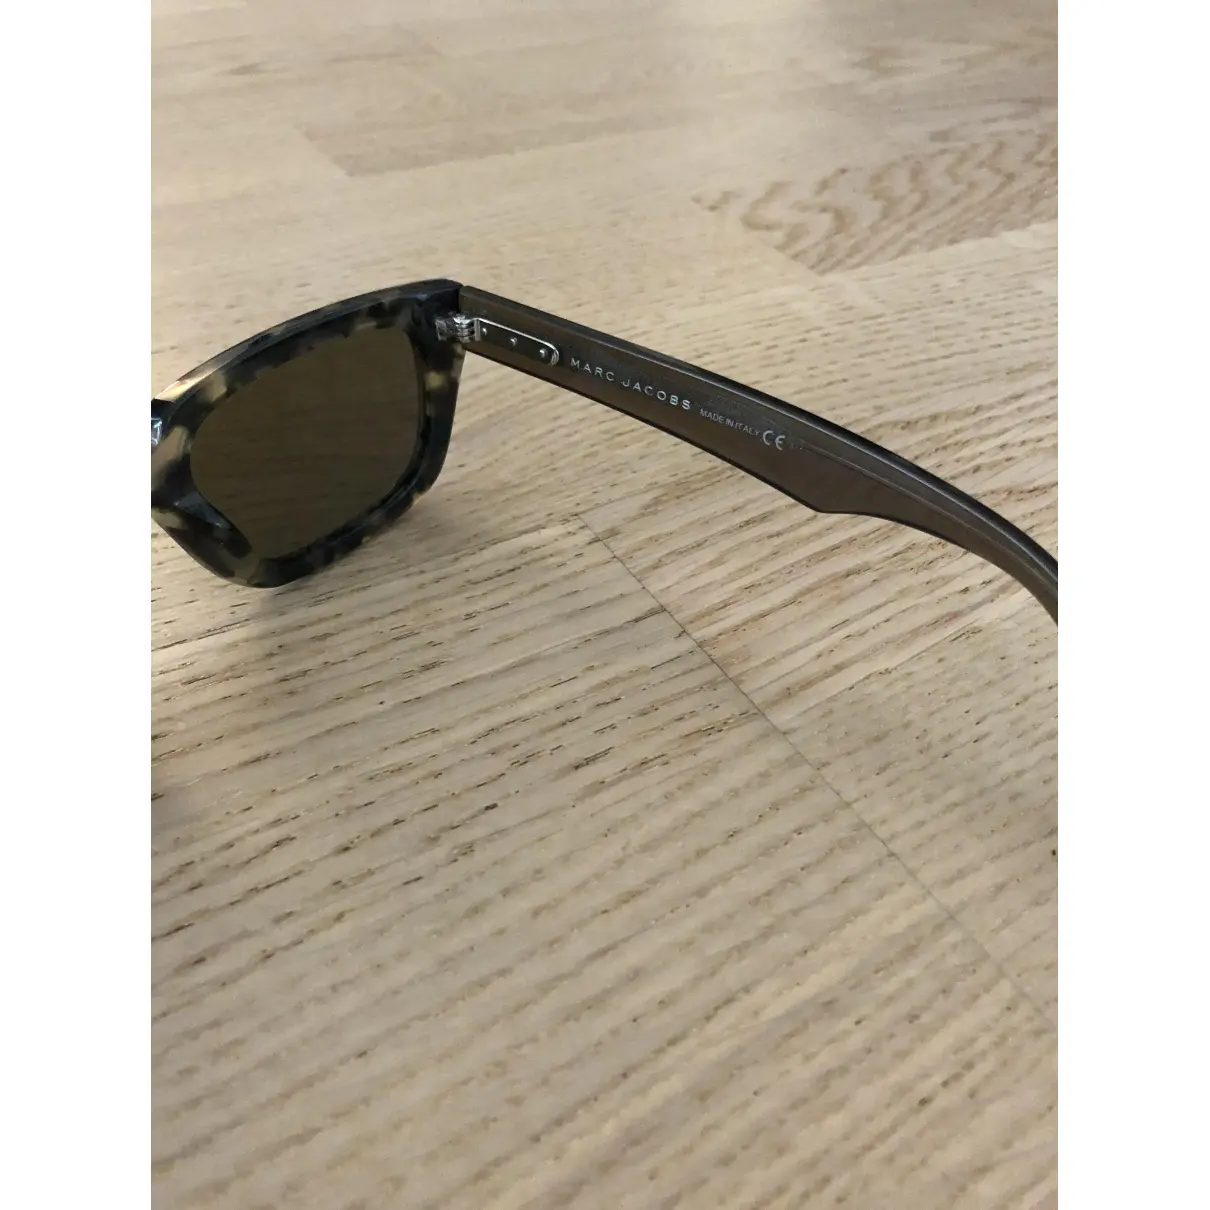 Buy Marc by Marc Jacobs Sunglasses online